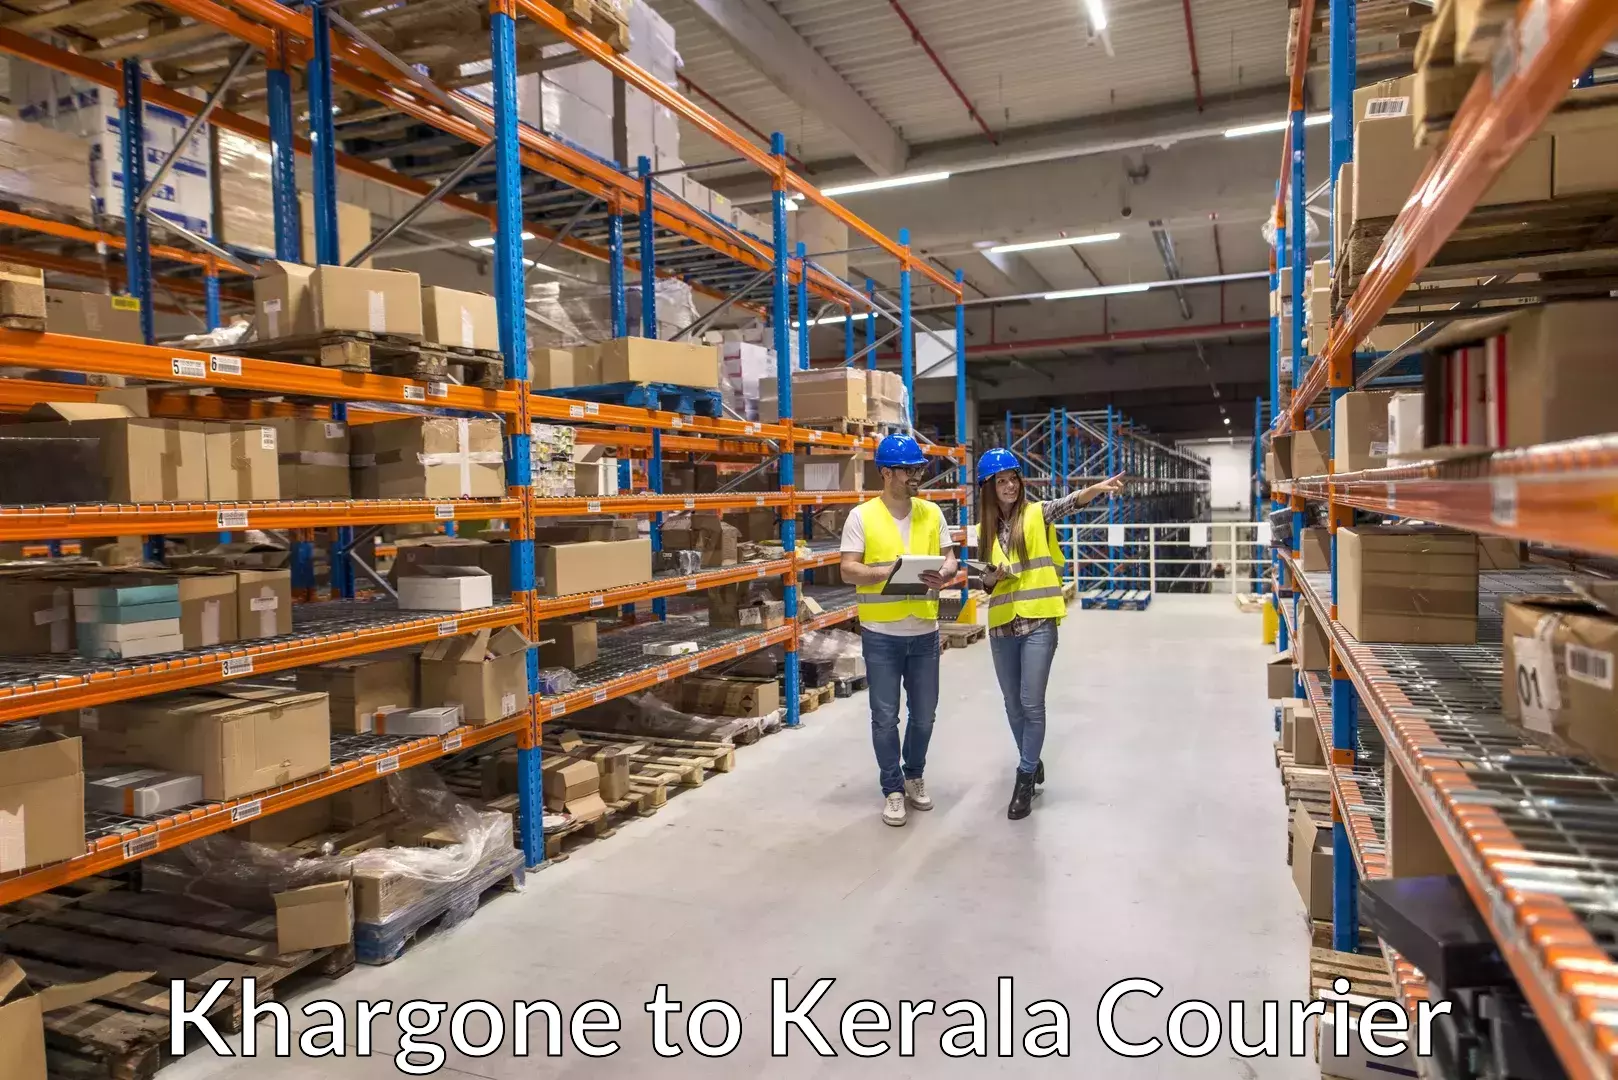 Luggage shipping planner Khargone to Kerala